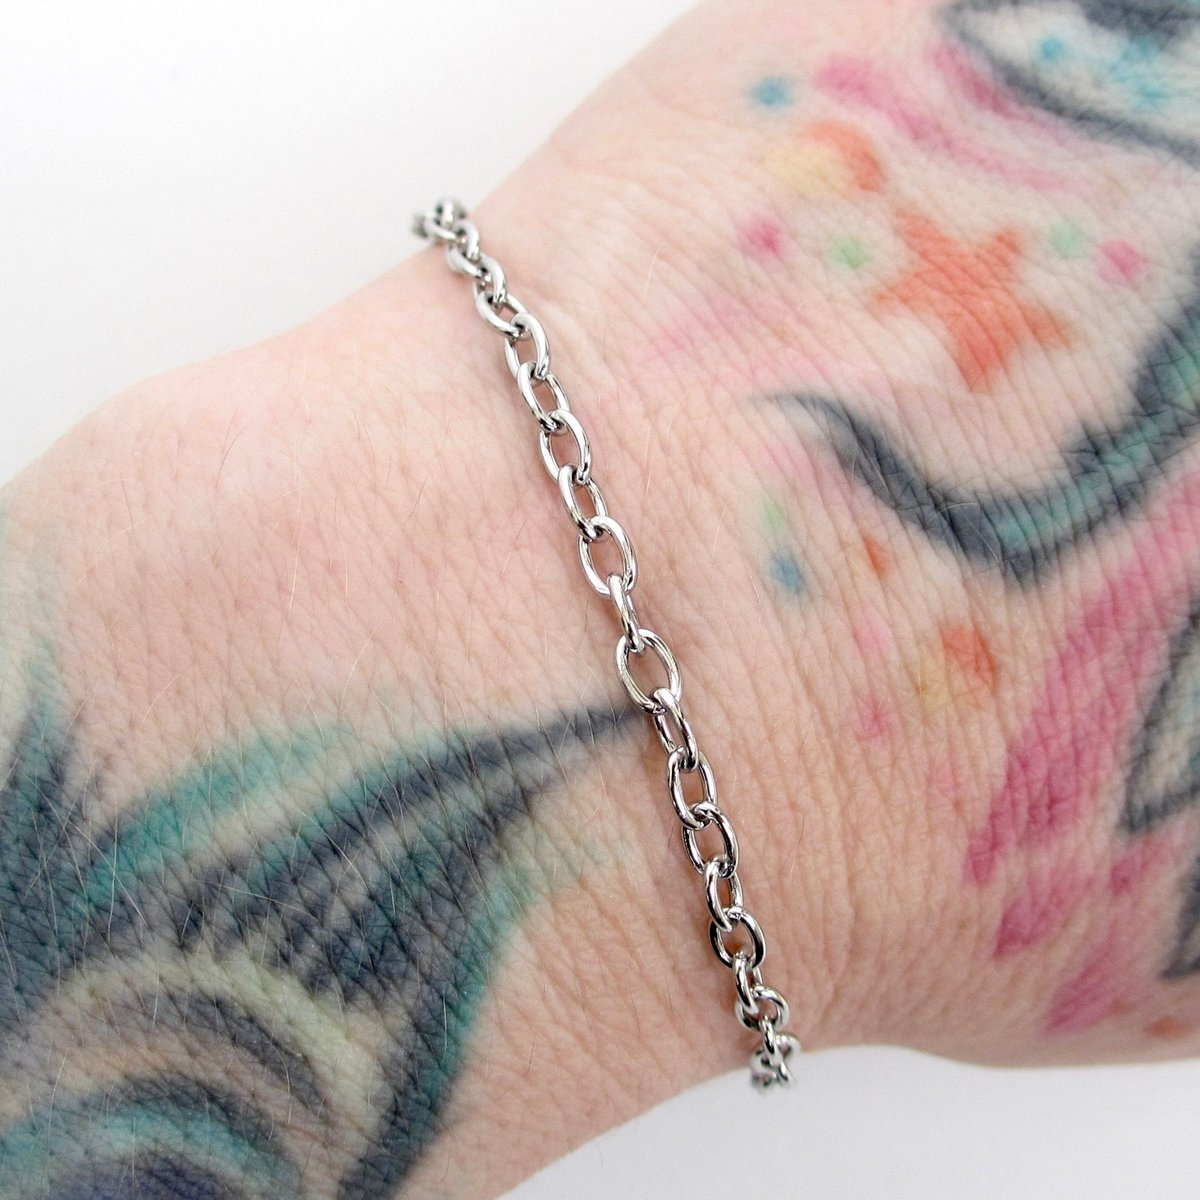 Stainless steel 3mm cable chain anklet, bracelet, or necklace- choose your length